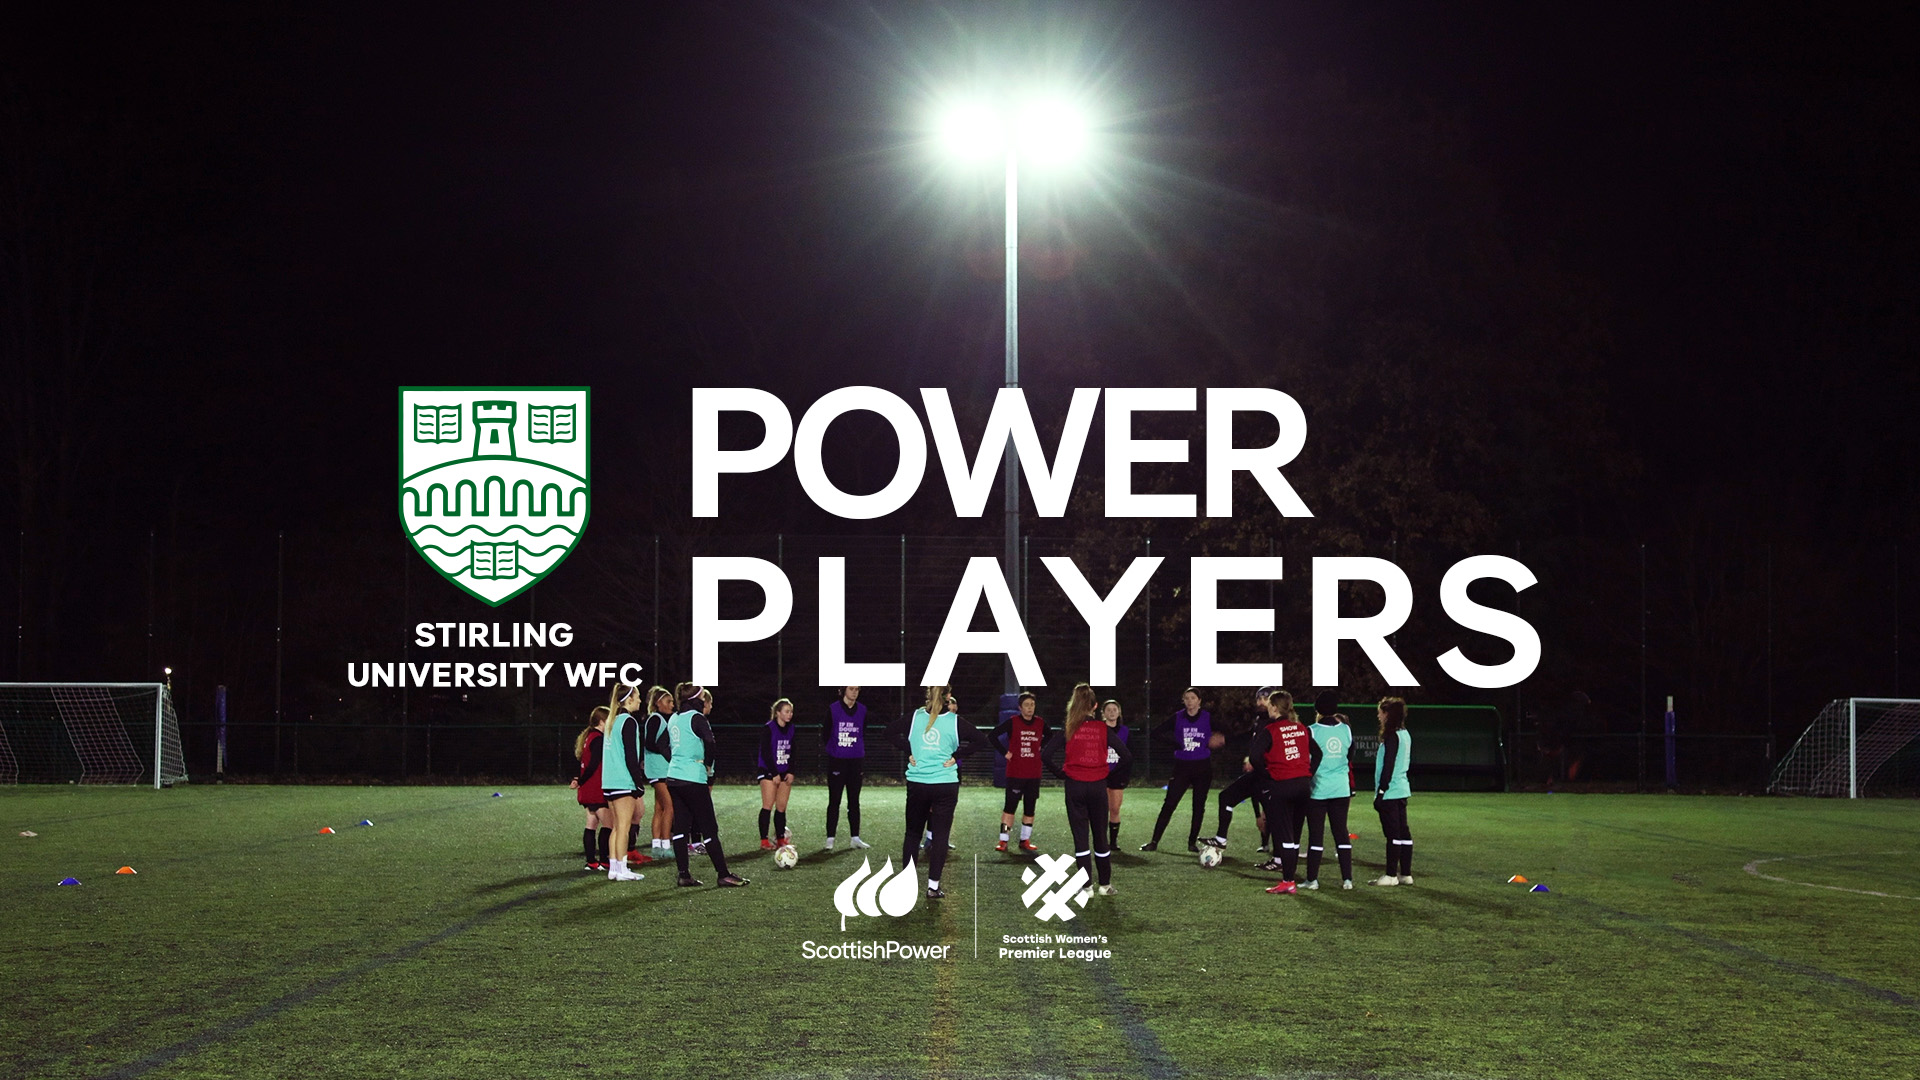 Power Players | Episode 4 | Stirling University | Brought to you by ScottishPower & the SWPL